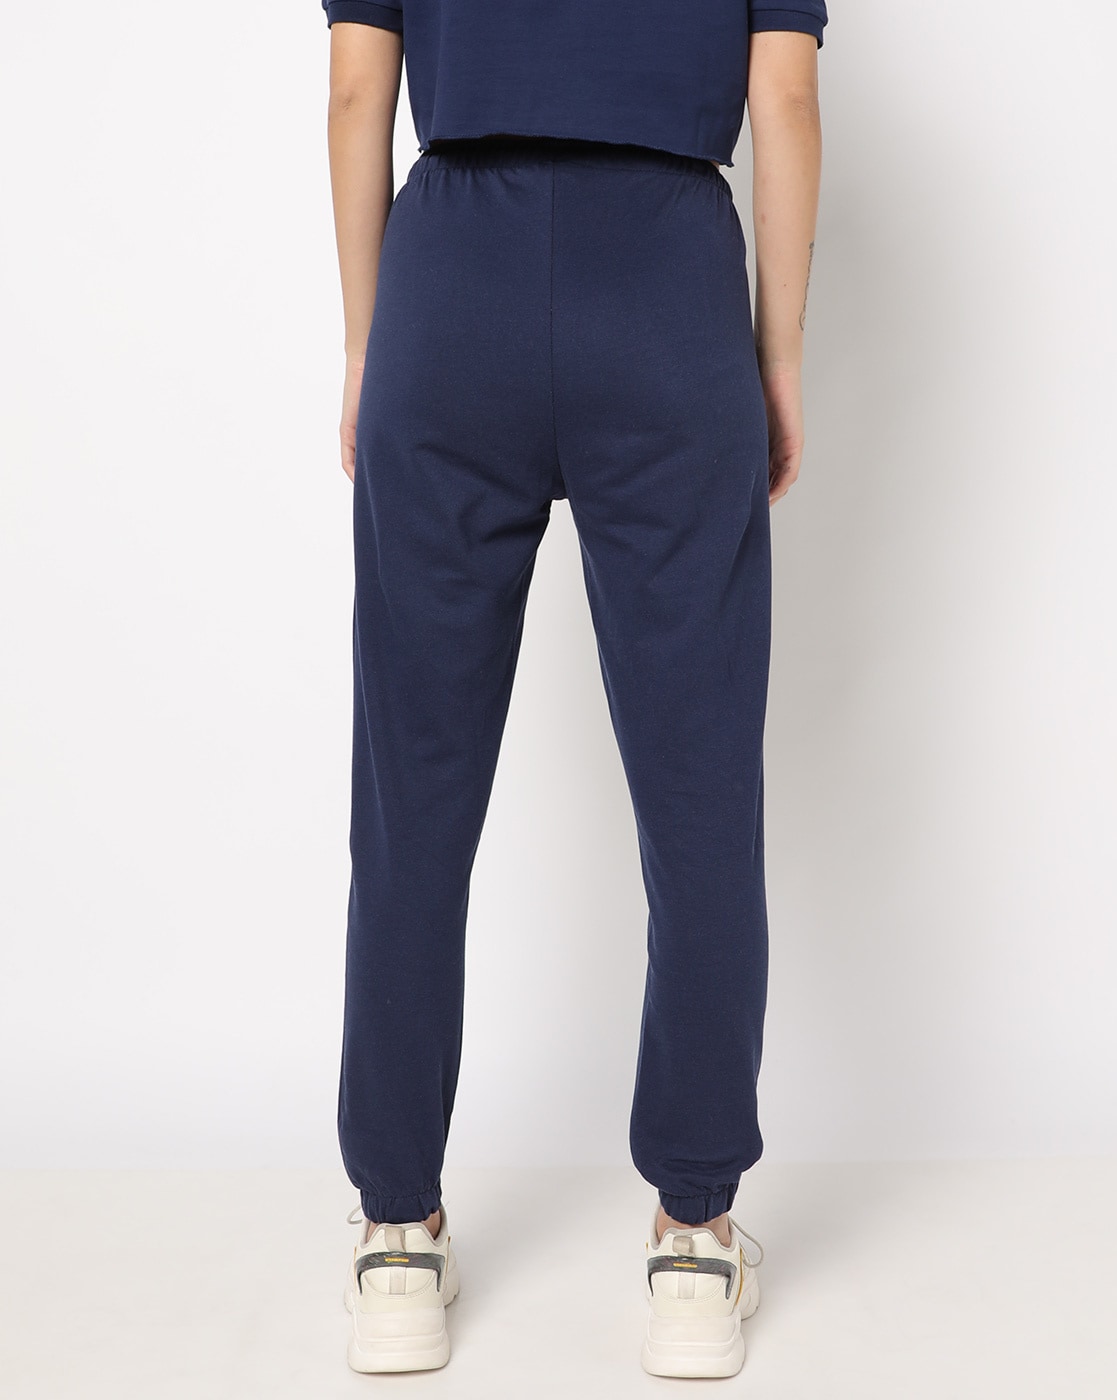 Printed Navy Blue Joggers Girls Track Pant at Rs 220/piece in Mumbai